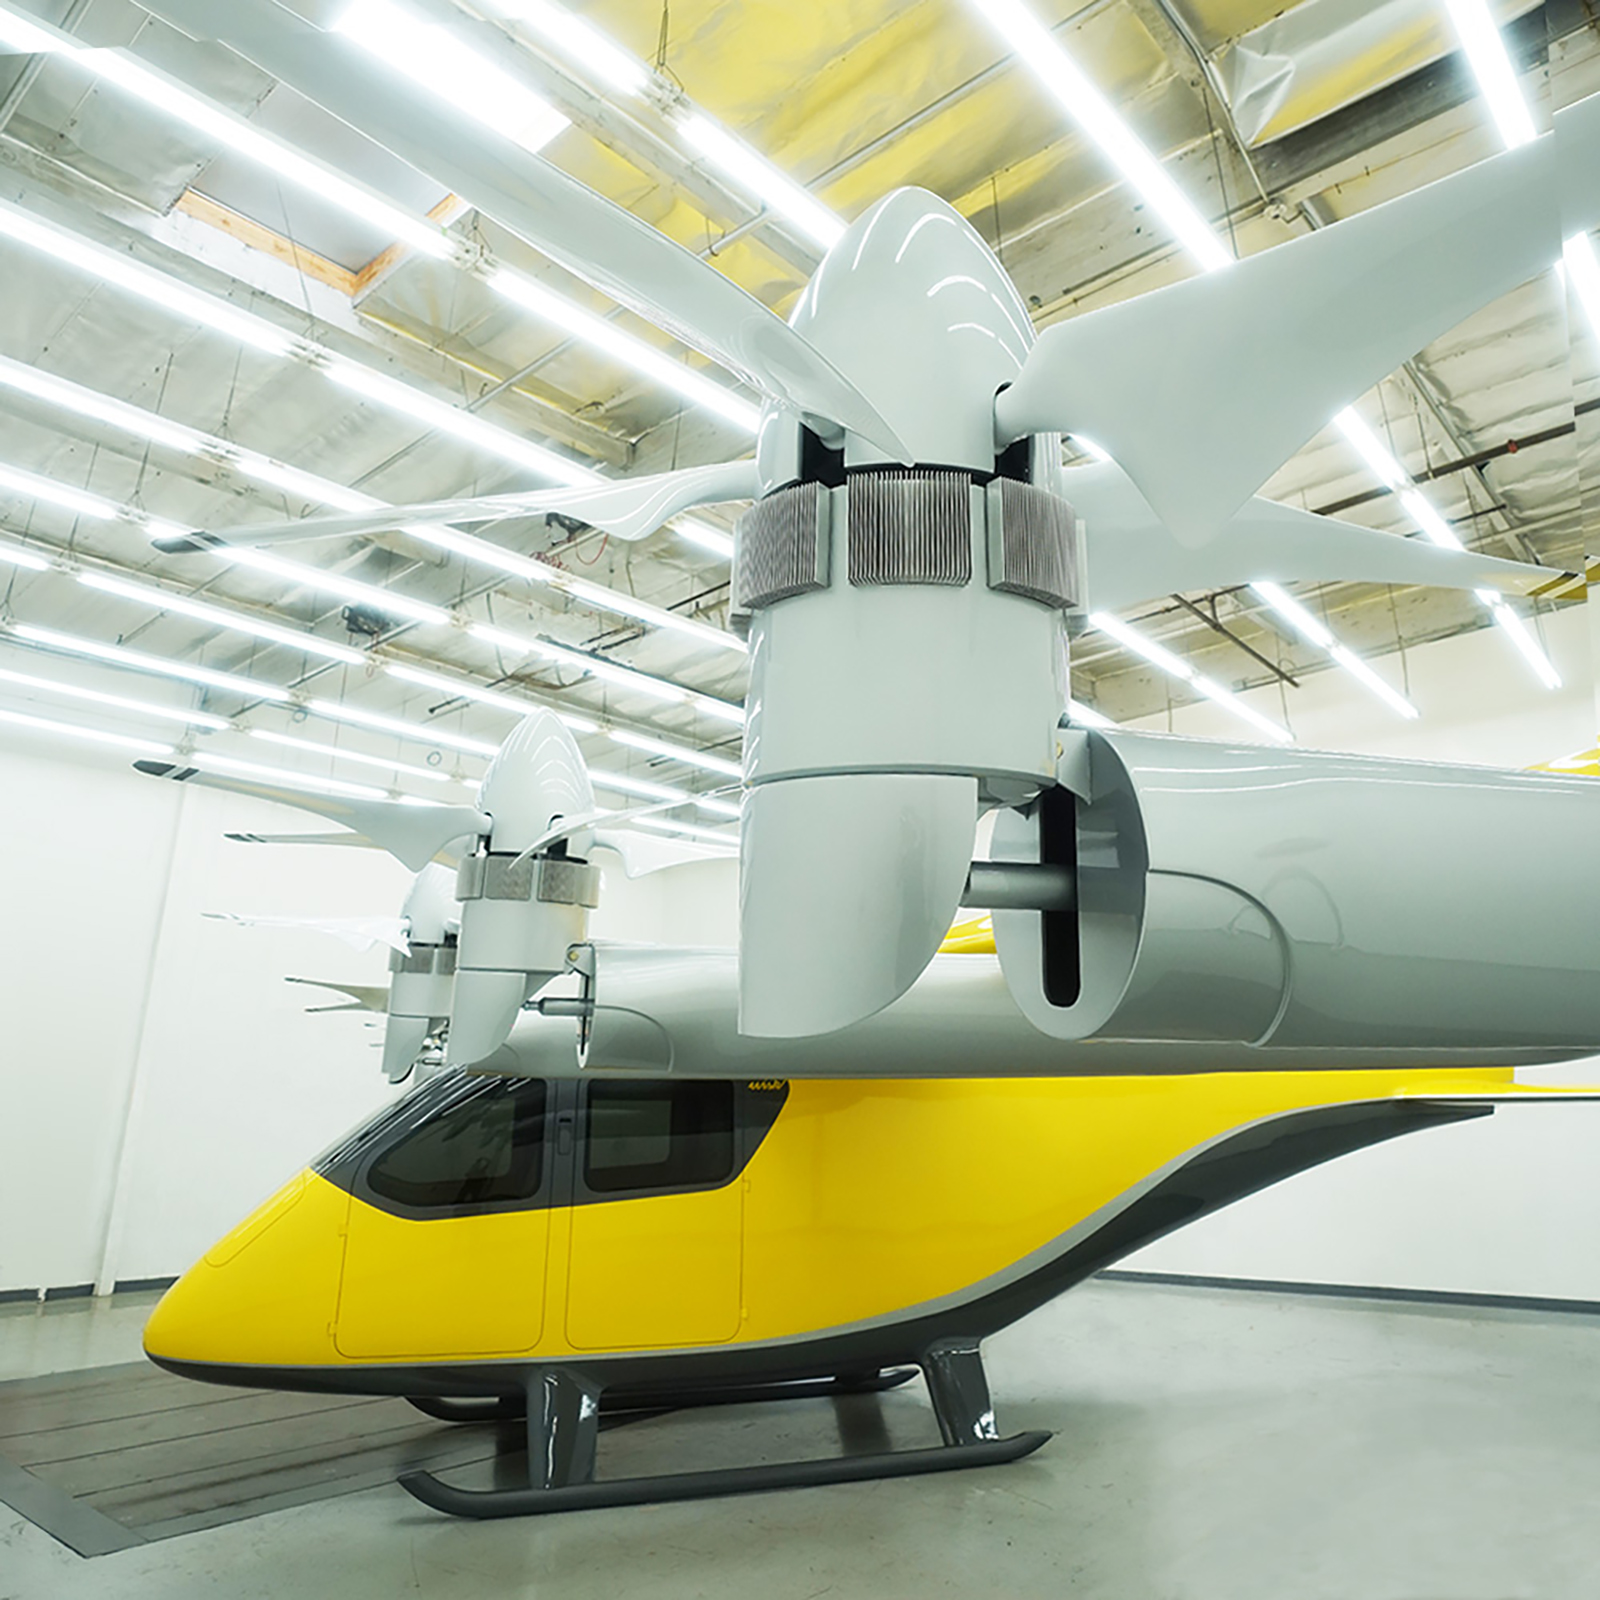 Wisk reveals its production aircraft, Generation 6, with new